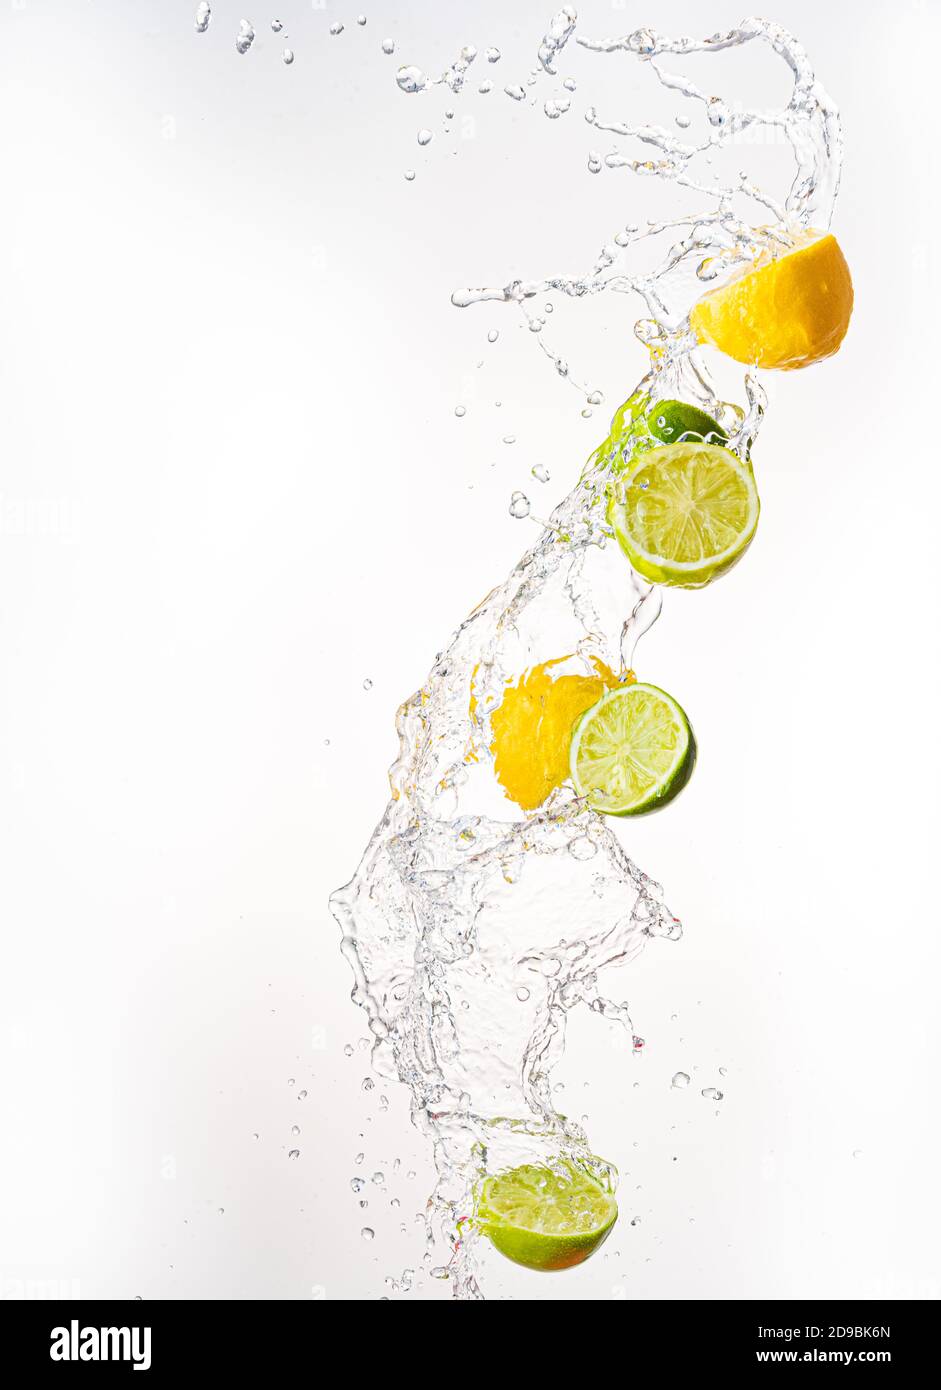 Fresh limes and lemons with water splash in midair, isolated on white background Stock Photo